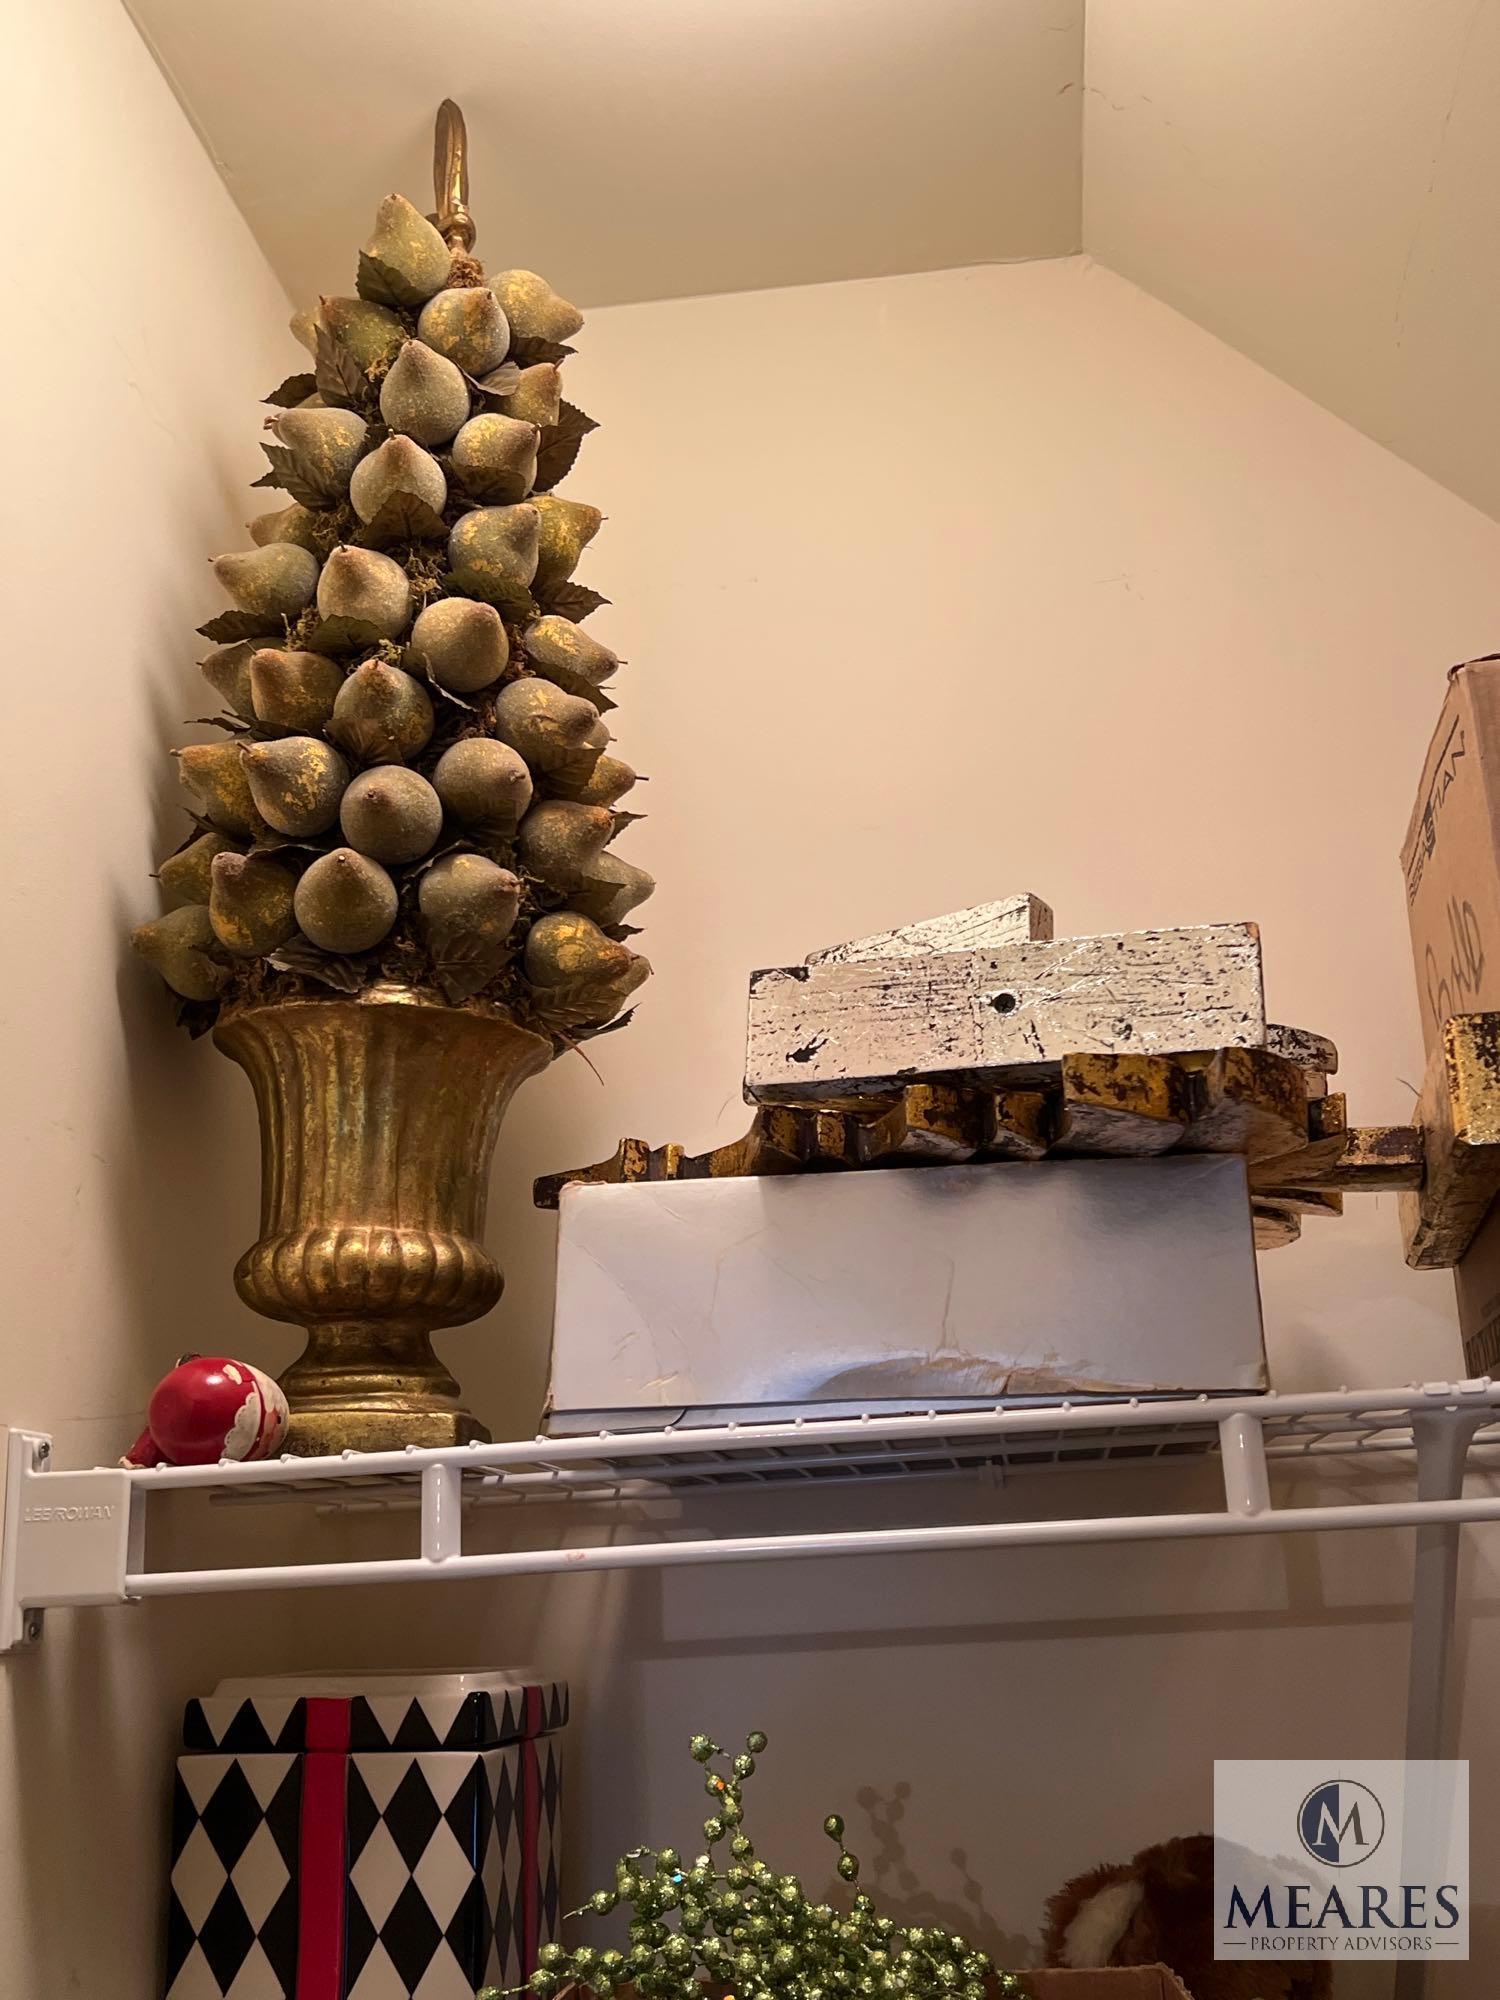 Contents of Upstairs Closet - Christmas Decor and Craft Supplies